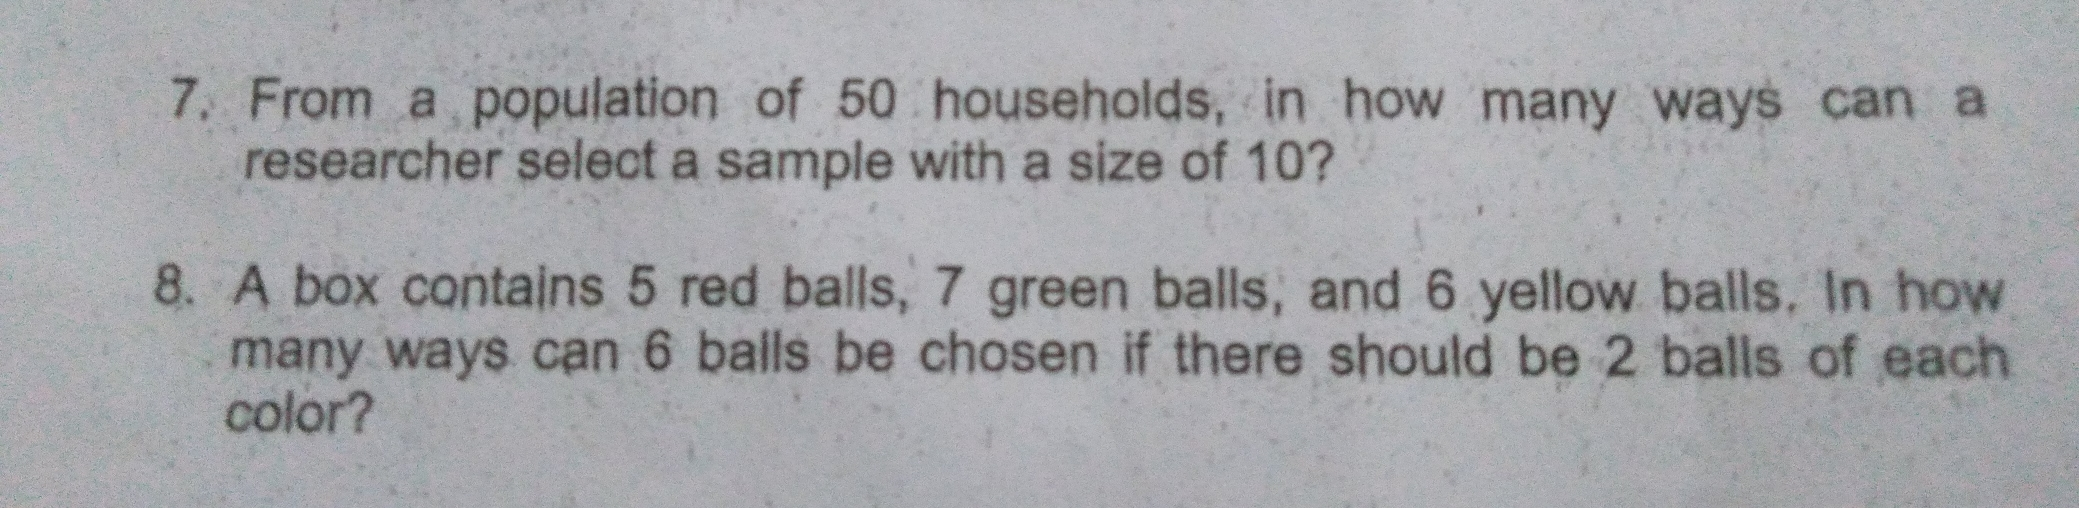 7, From a population of 50 households, in how many ways can a researcher select a sample with a size of 10? 8. A box contains 5 red balls, 7 green balls, and 6 yellow balls, In how many ways can 6 balls be chosen if there should be 2 balls of each color?